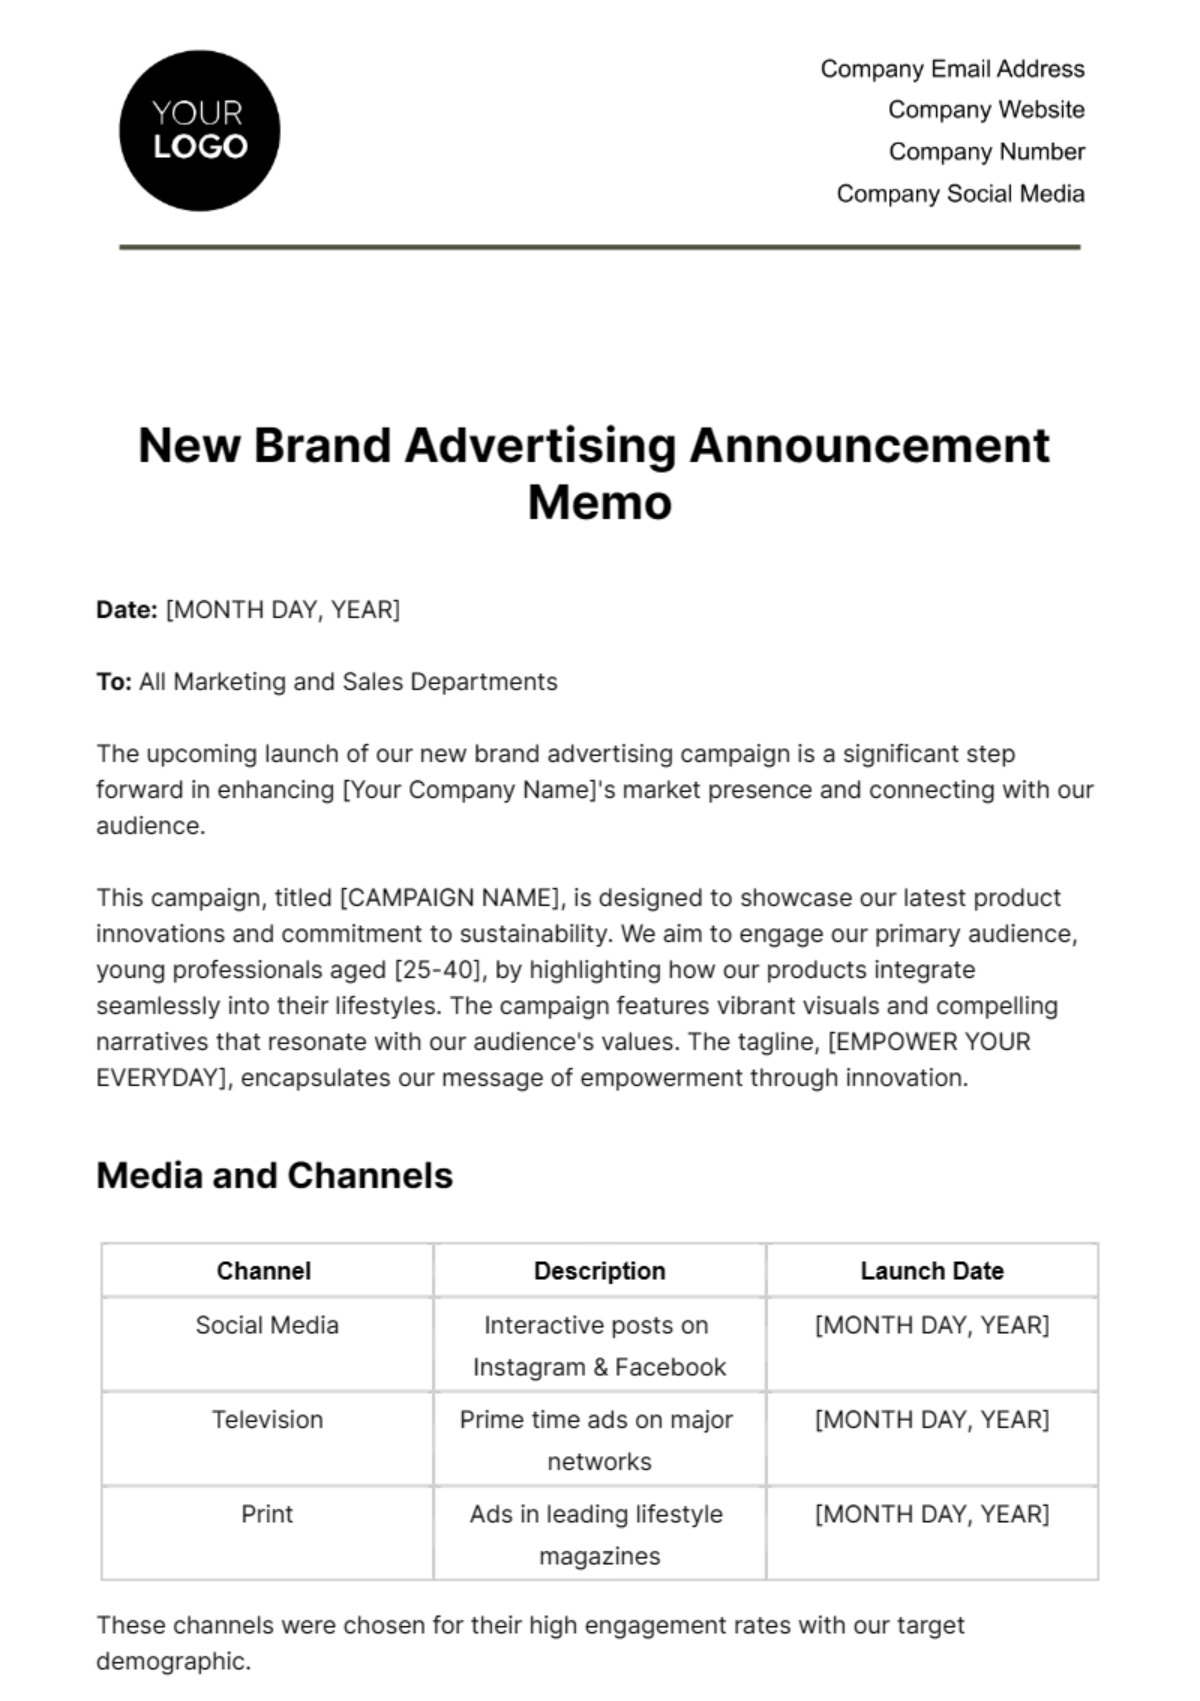 Free New Brand Advertising Announcement Memo Template